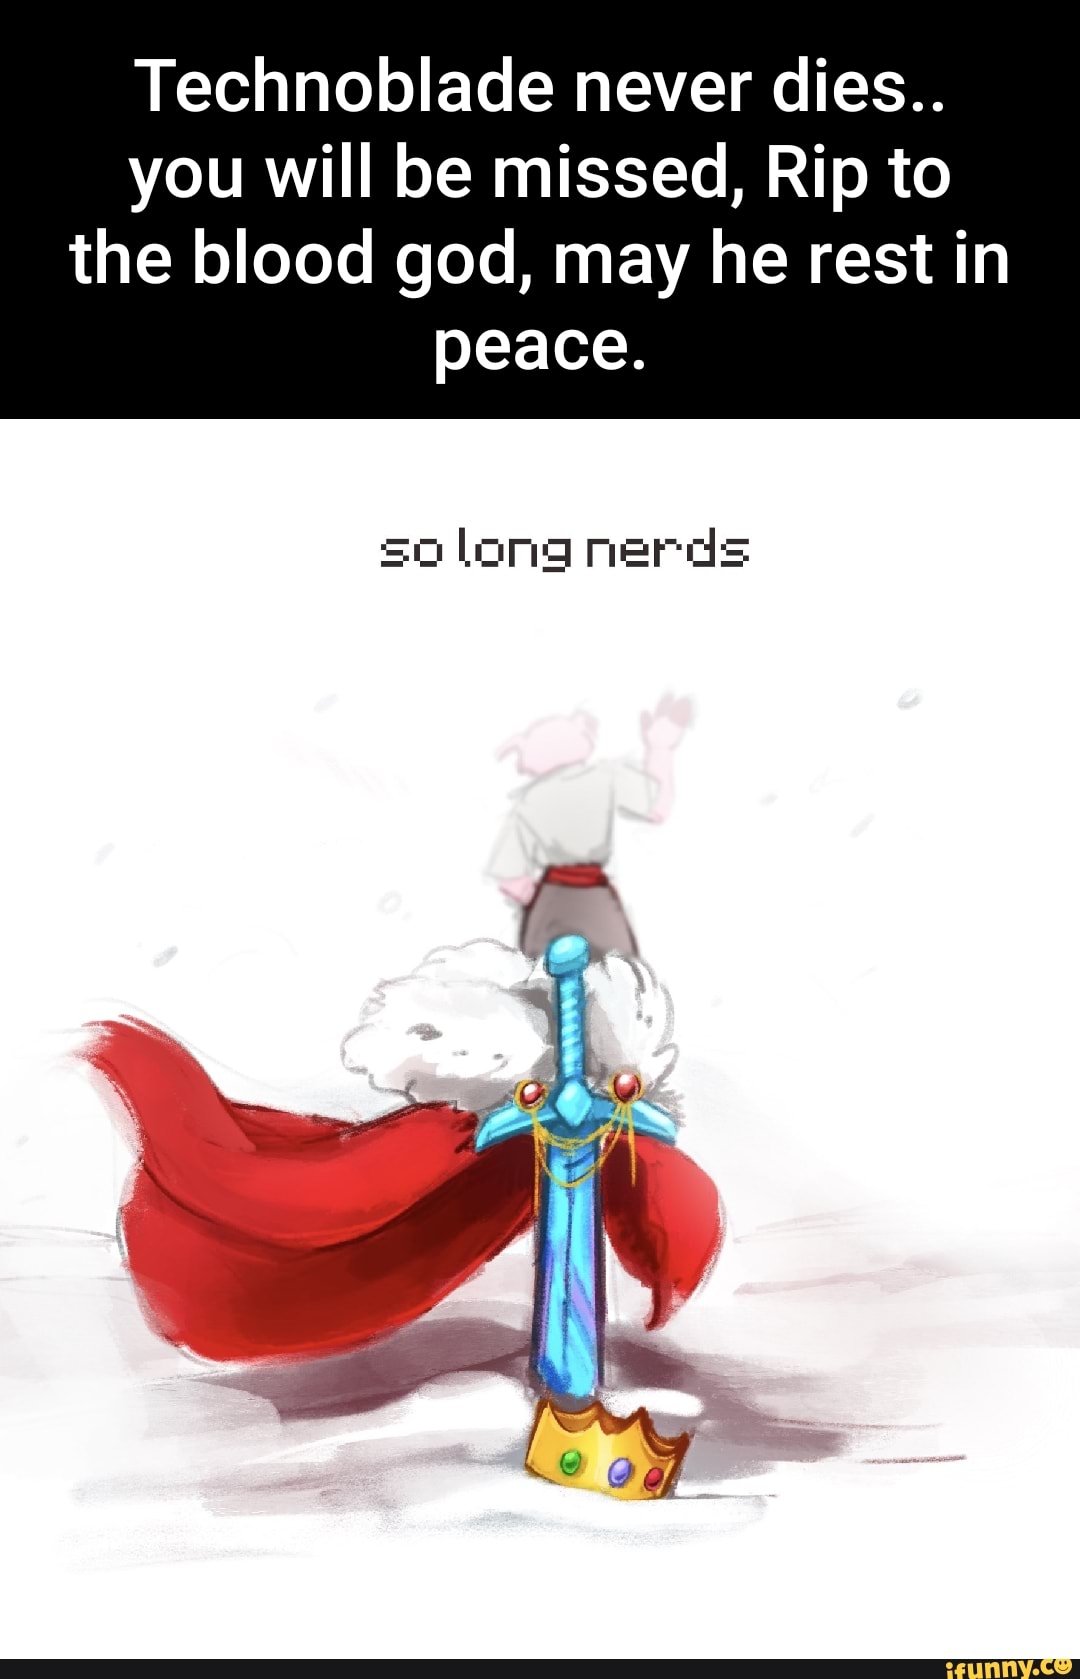 Technoblade hi was a legend rest in peace our dearly beloved technoblade  #we miss you:( - BiliBili